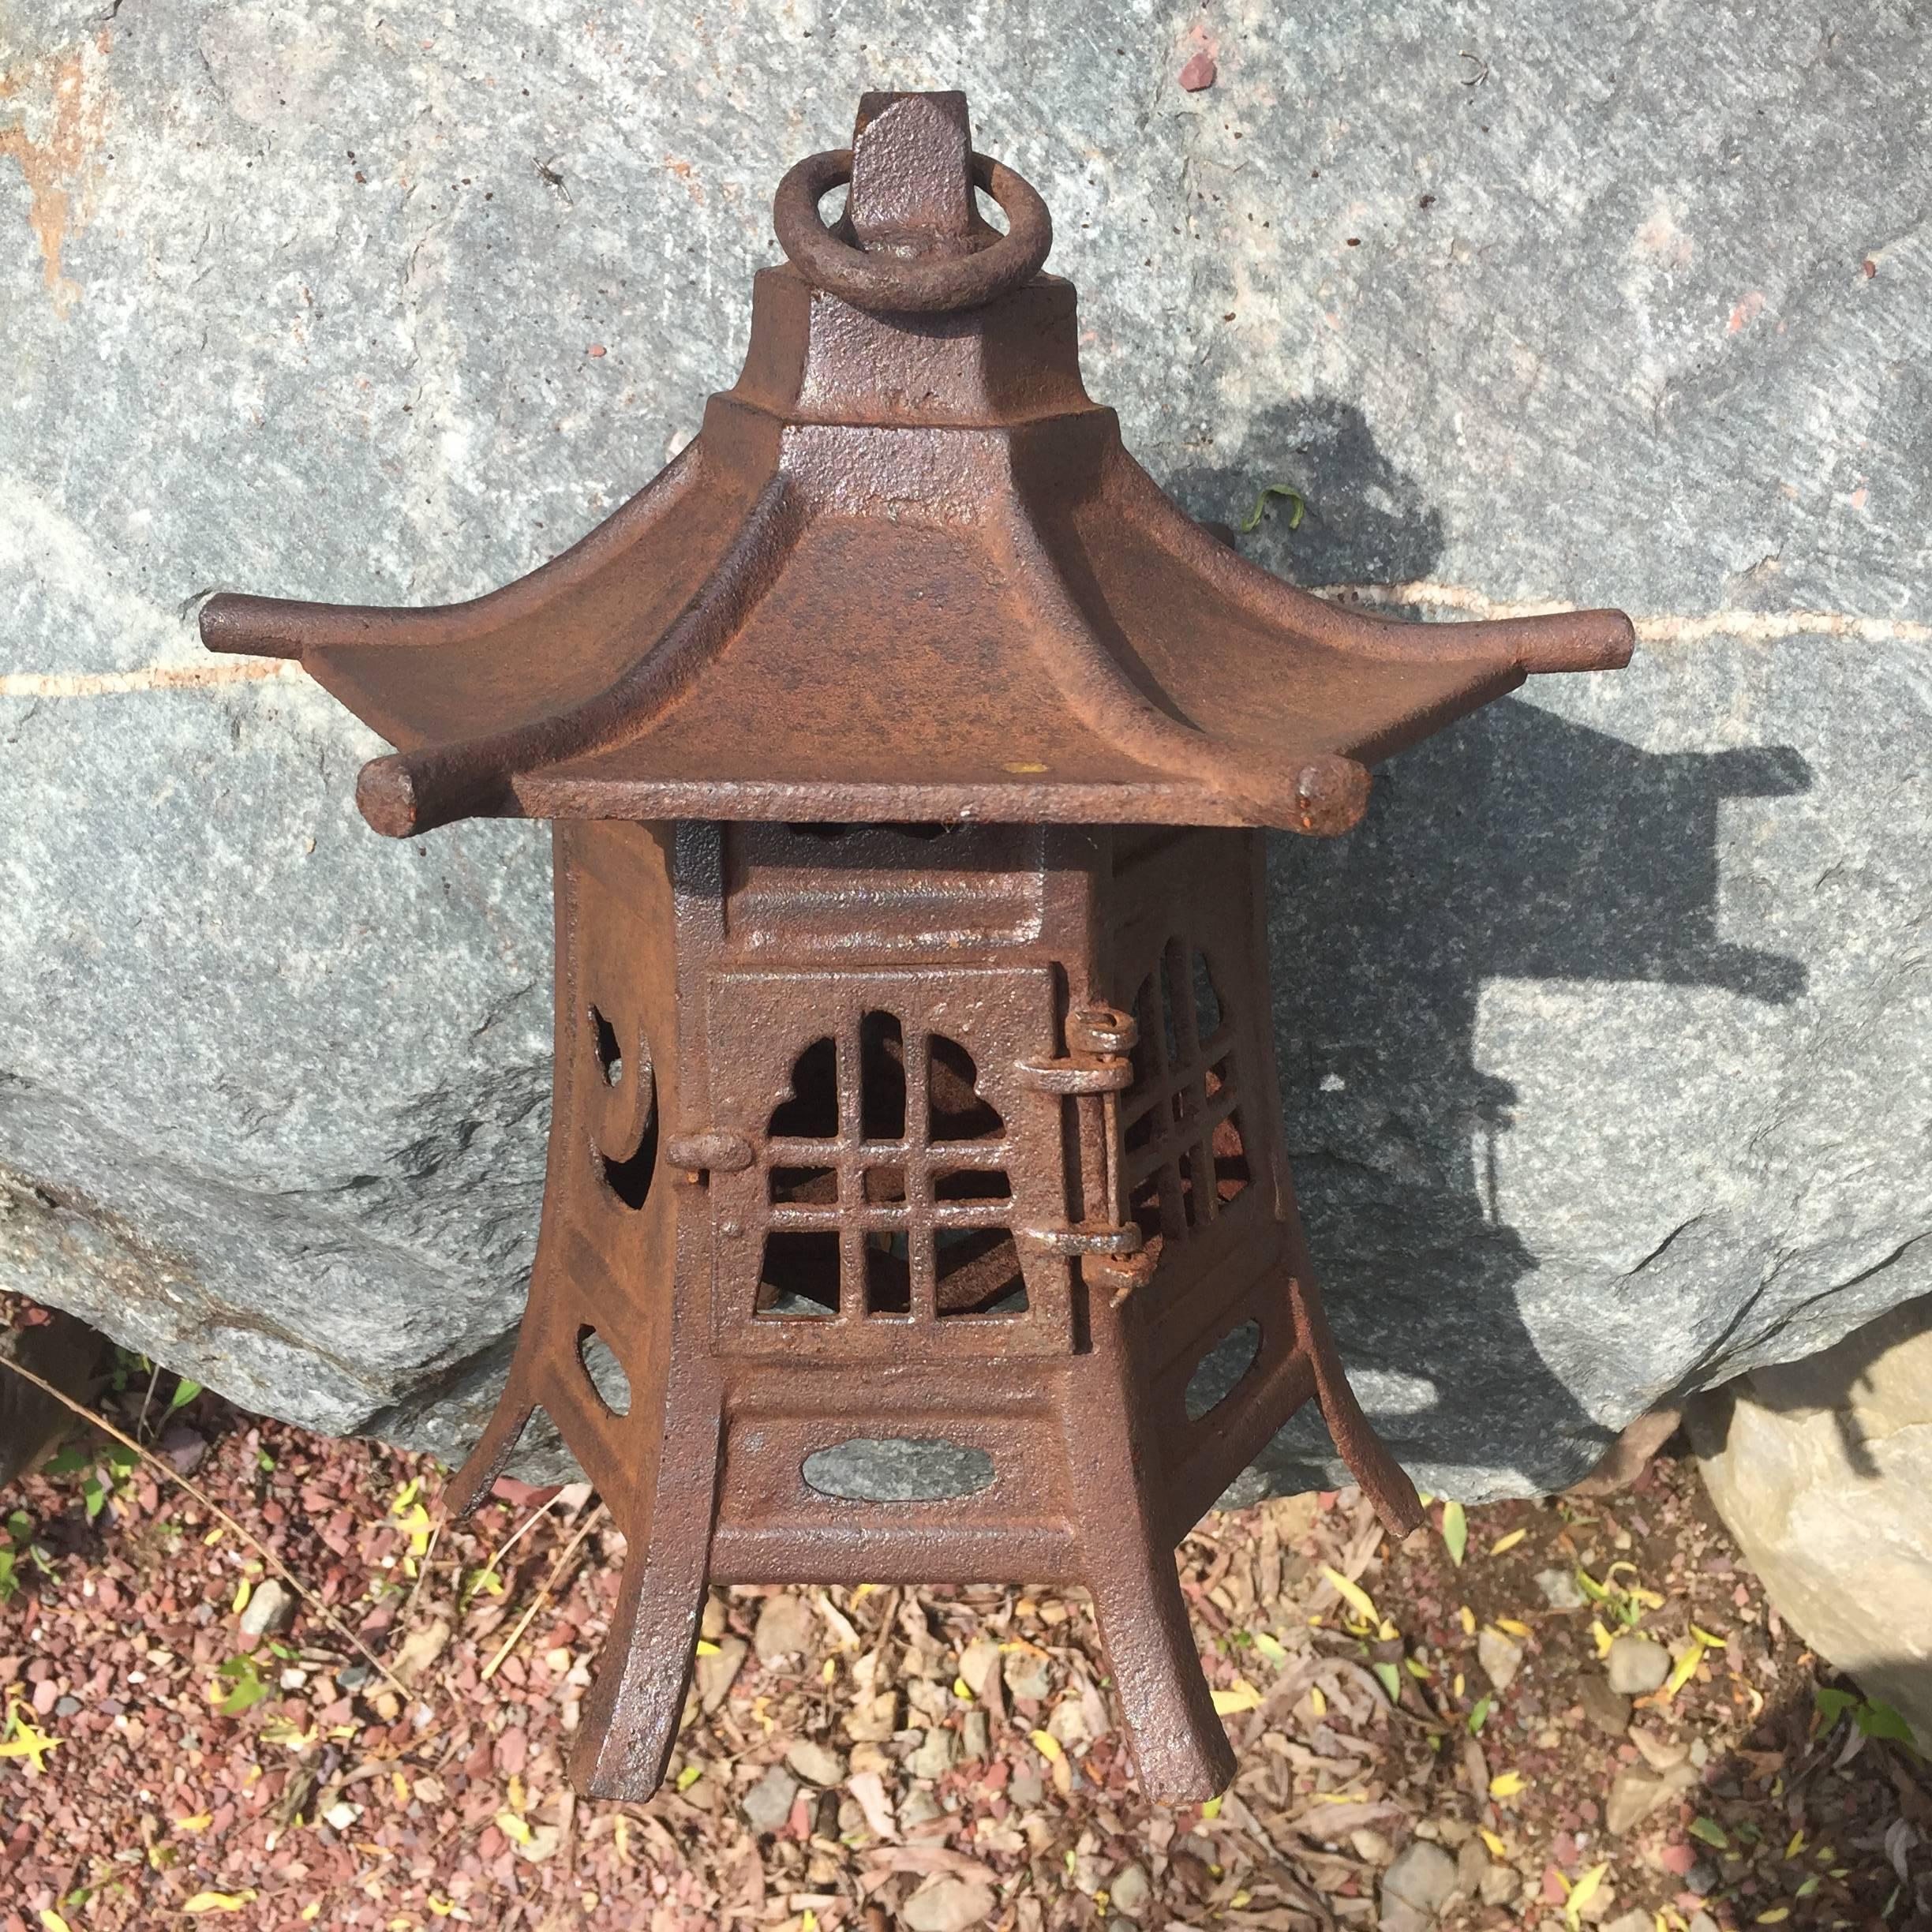 Japan, an unusual and handsome large handcrafted iron lantern with unusually simple lines and fine details.

This is the first of this style we have seen in over fifteen years of dealing with fine Japanese garden ornaments.

Dimensions: 12 inches